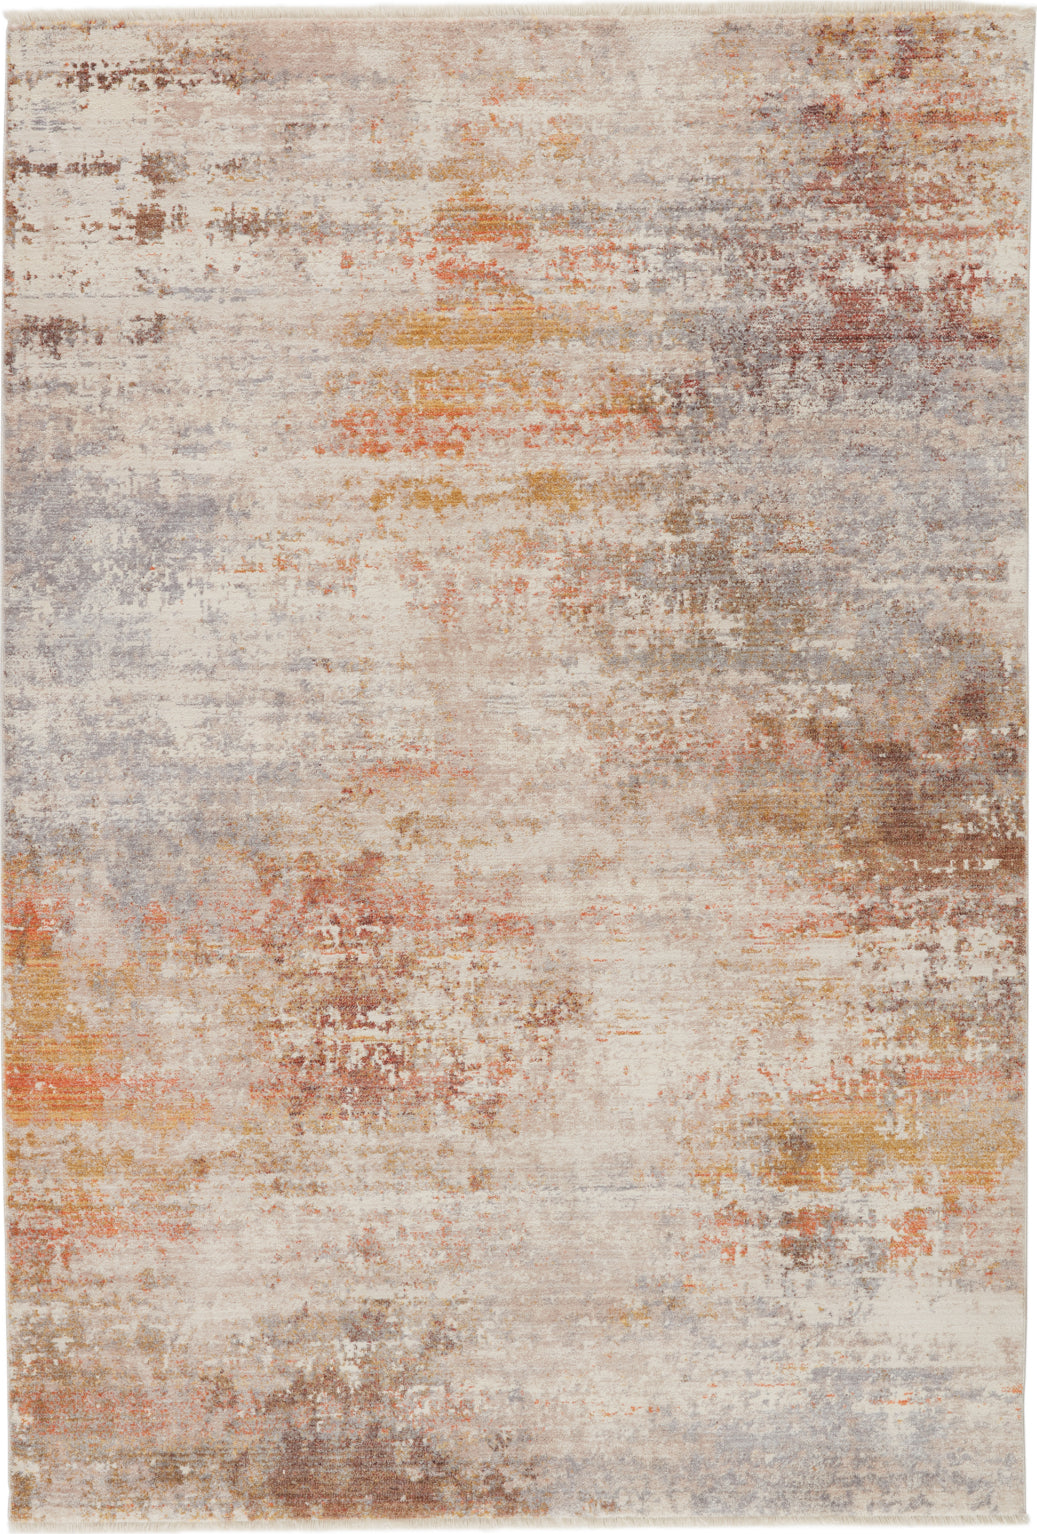 Jaipur Living Terra Berquist TRR07 Multicolor/White Area Rug by Vibe Main Image